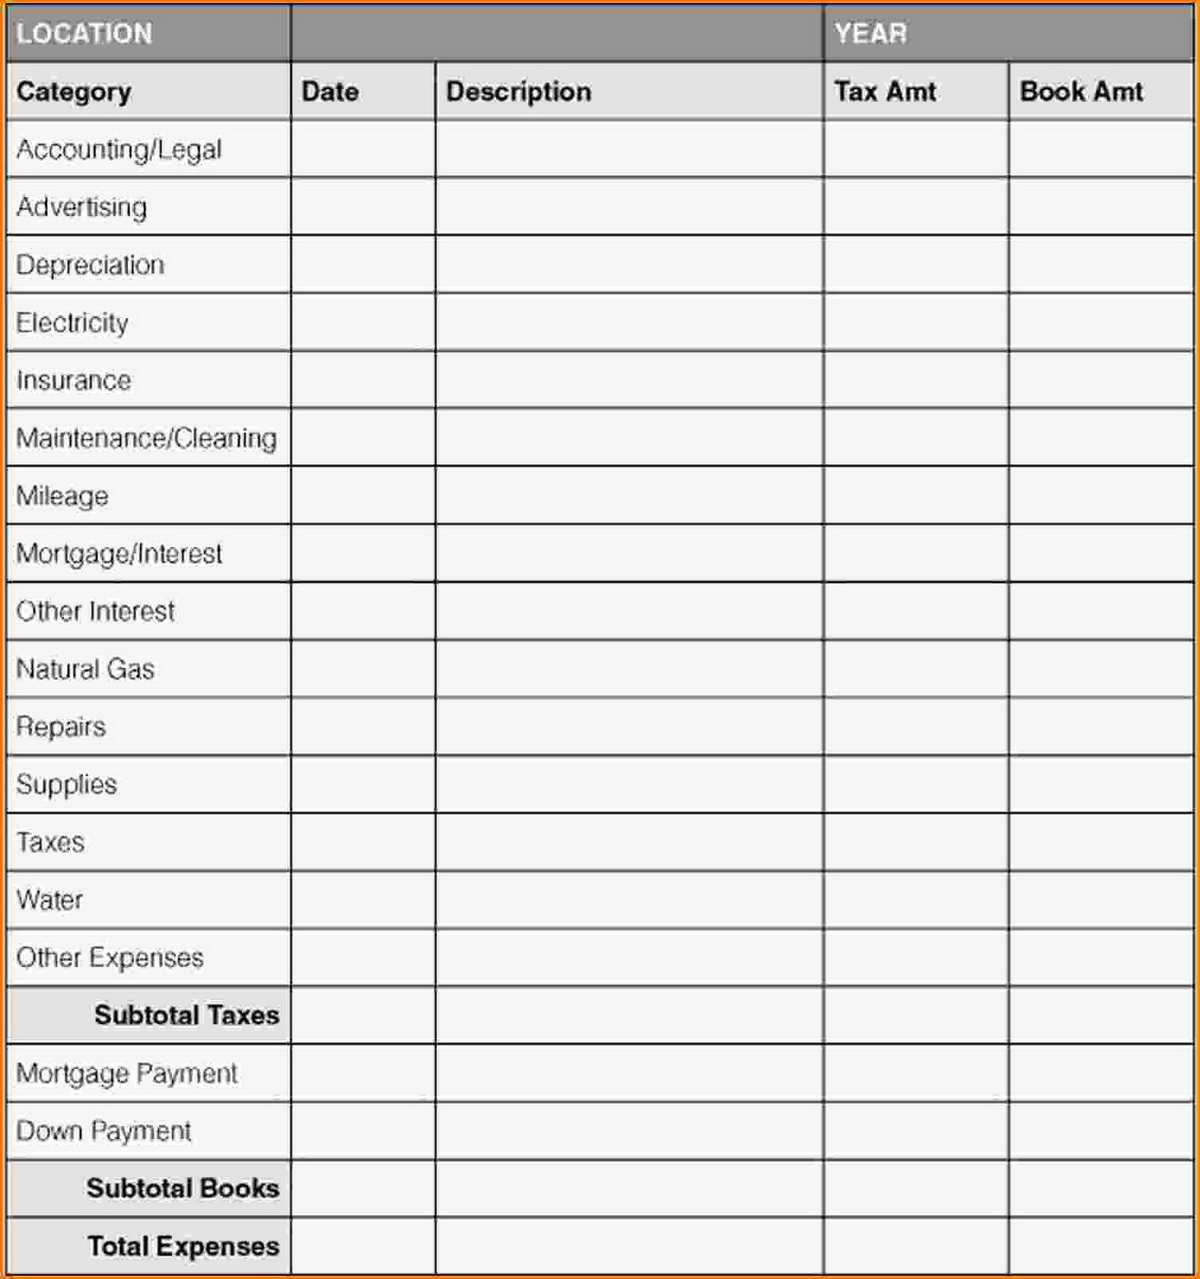 Business Finance Spreadsheet Regarding Business Expense Tracking Spreadsheet With Small Business Expenses